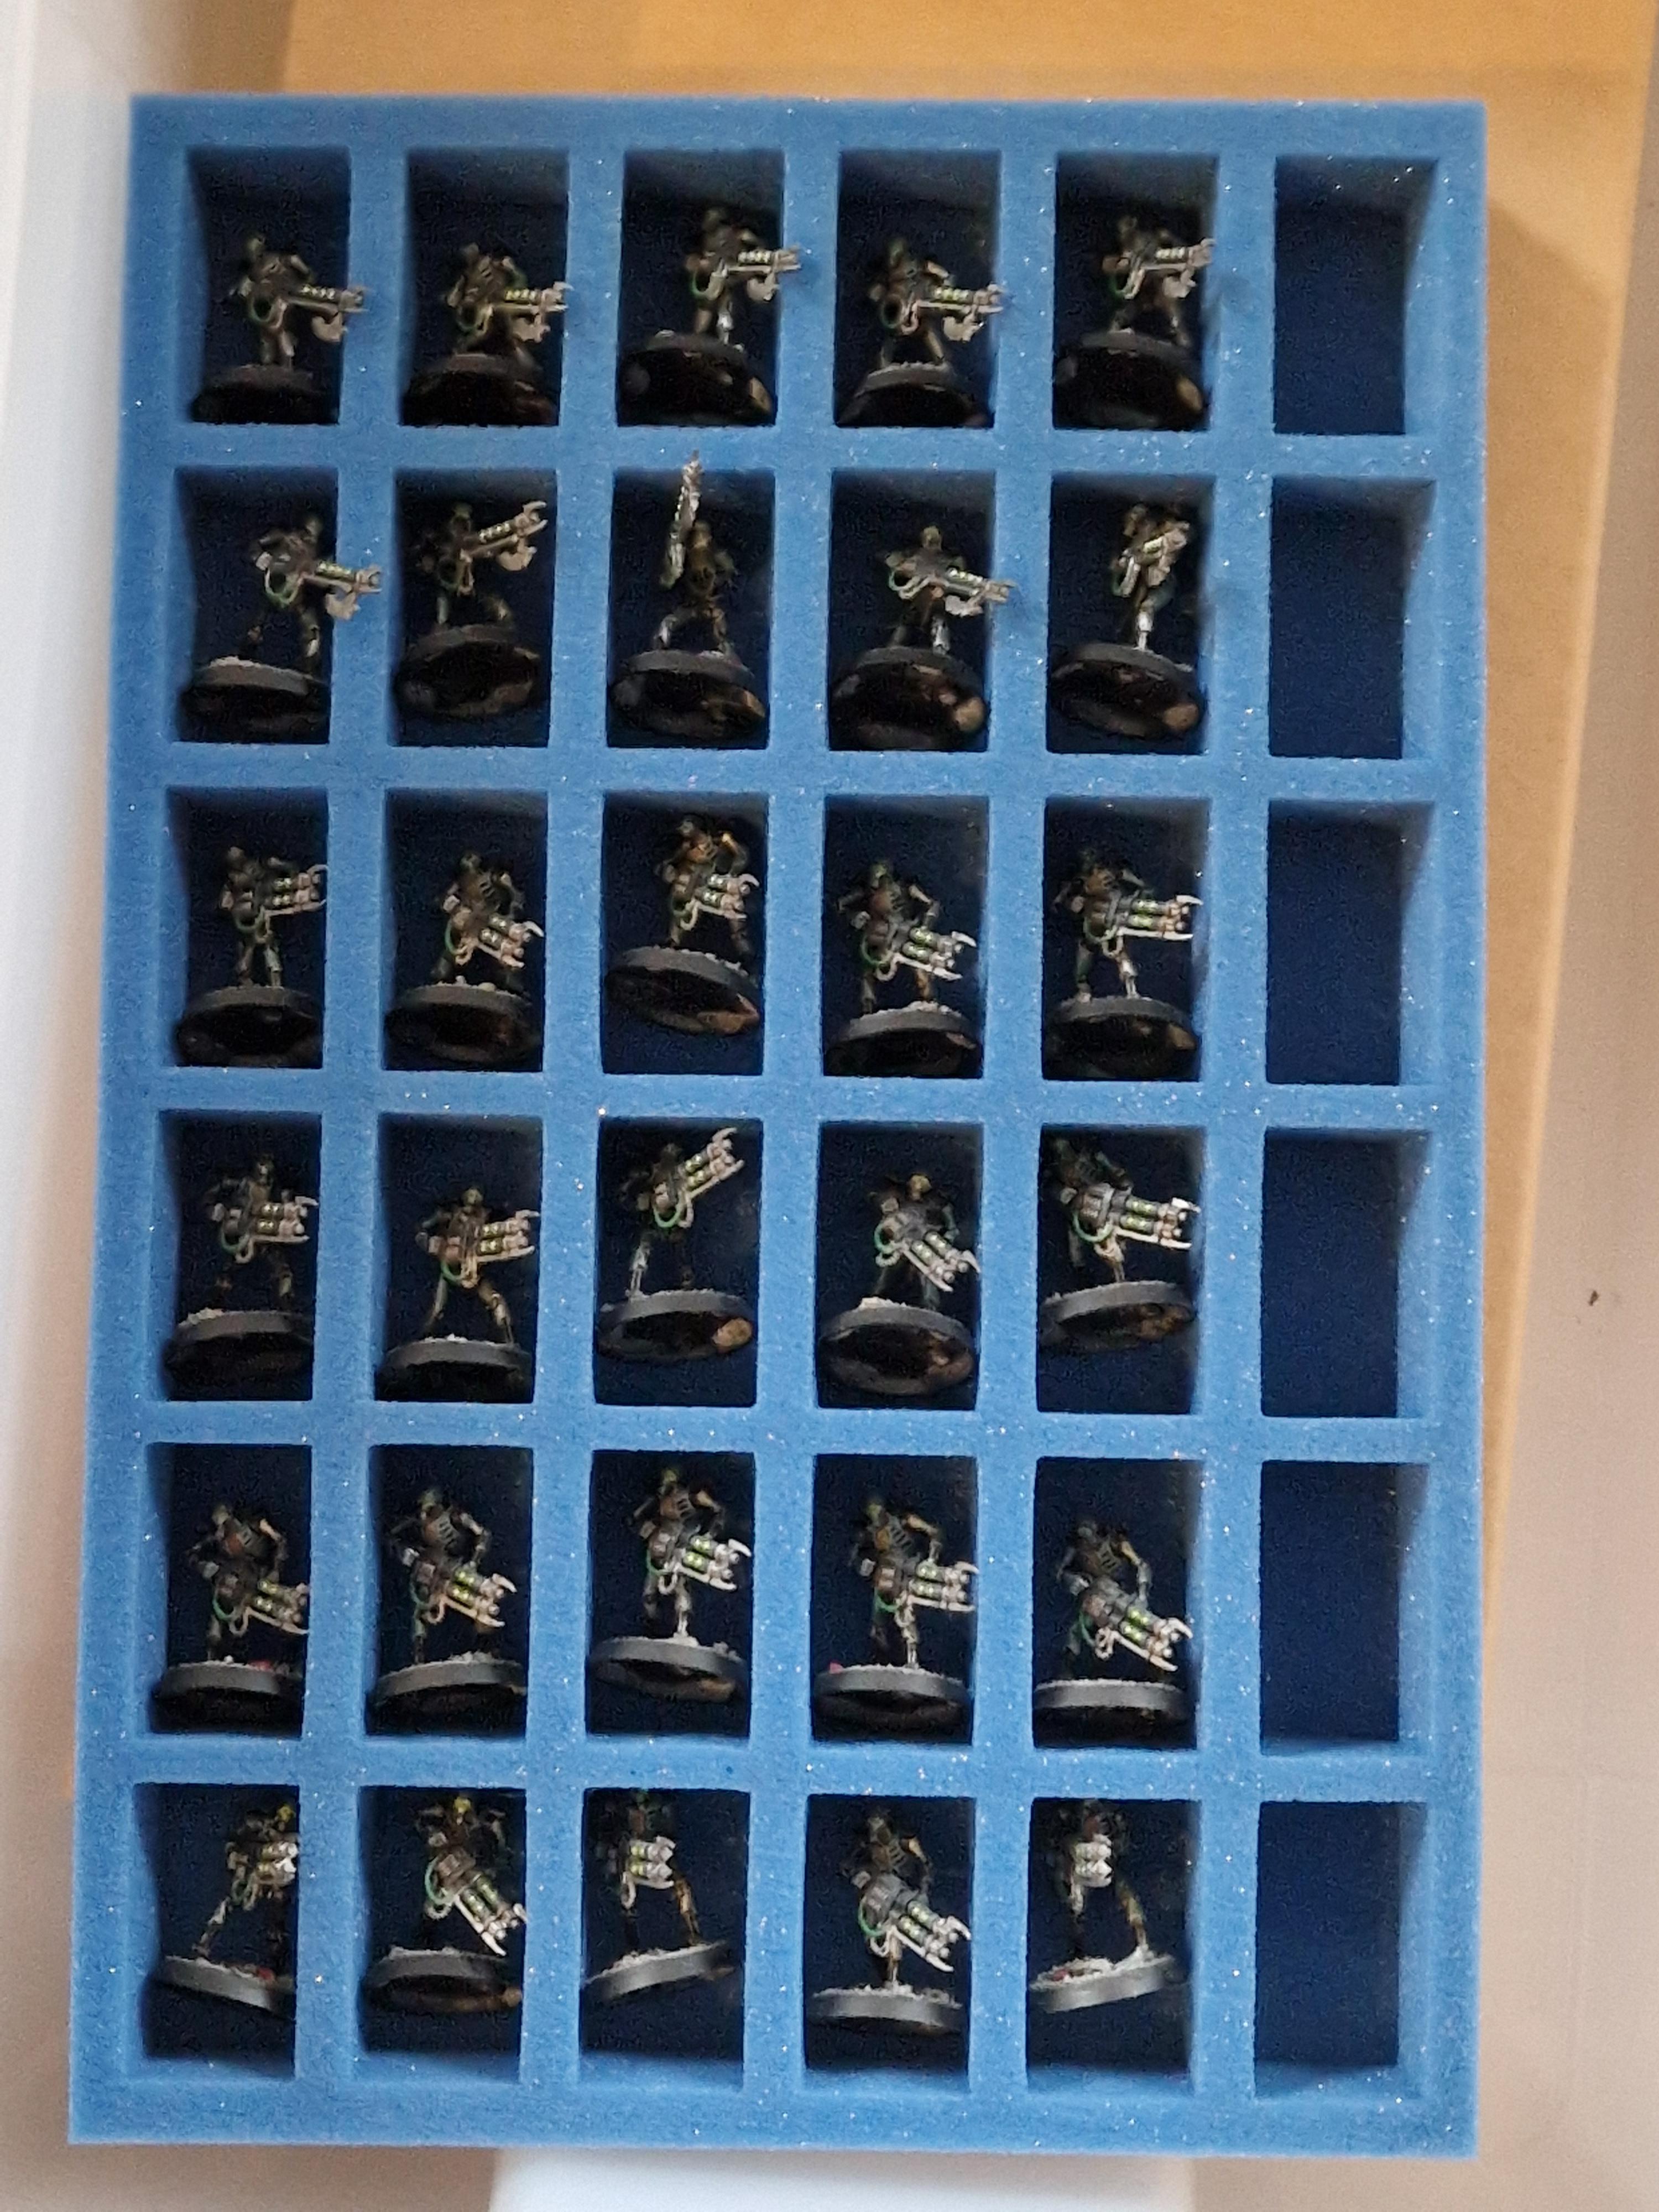 A tray of warriors